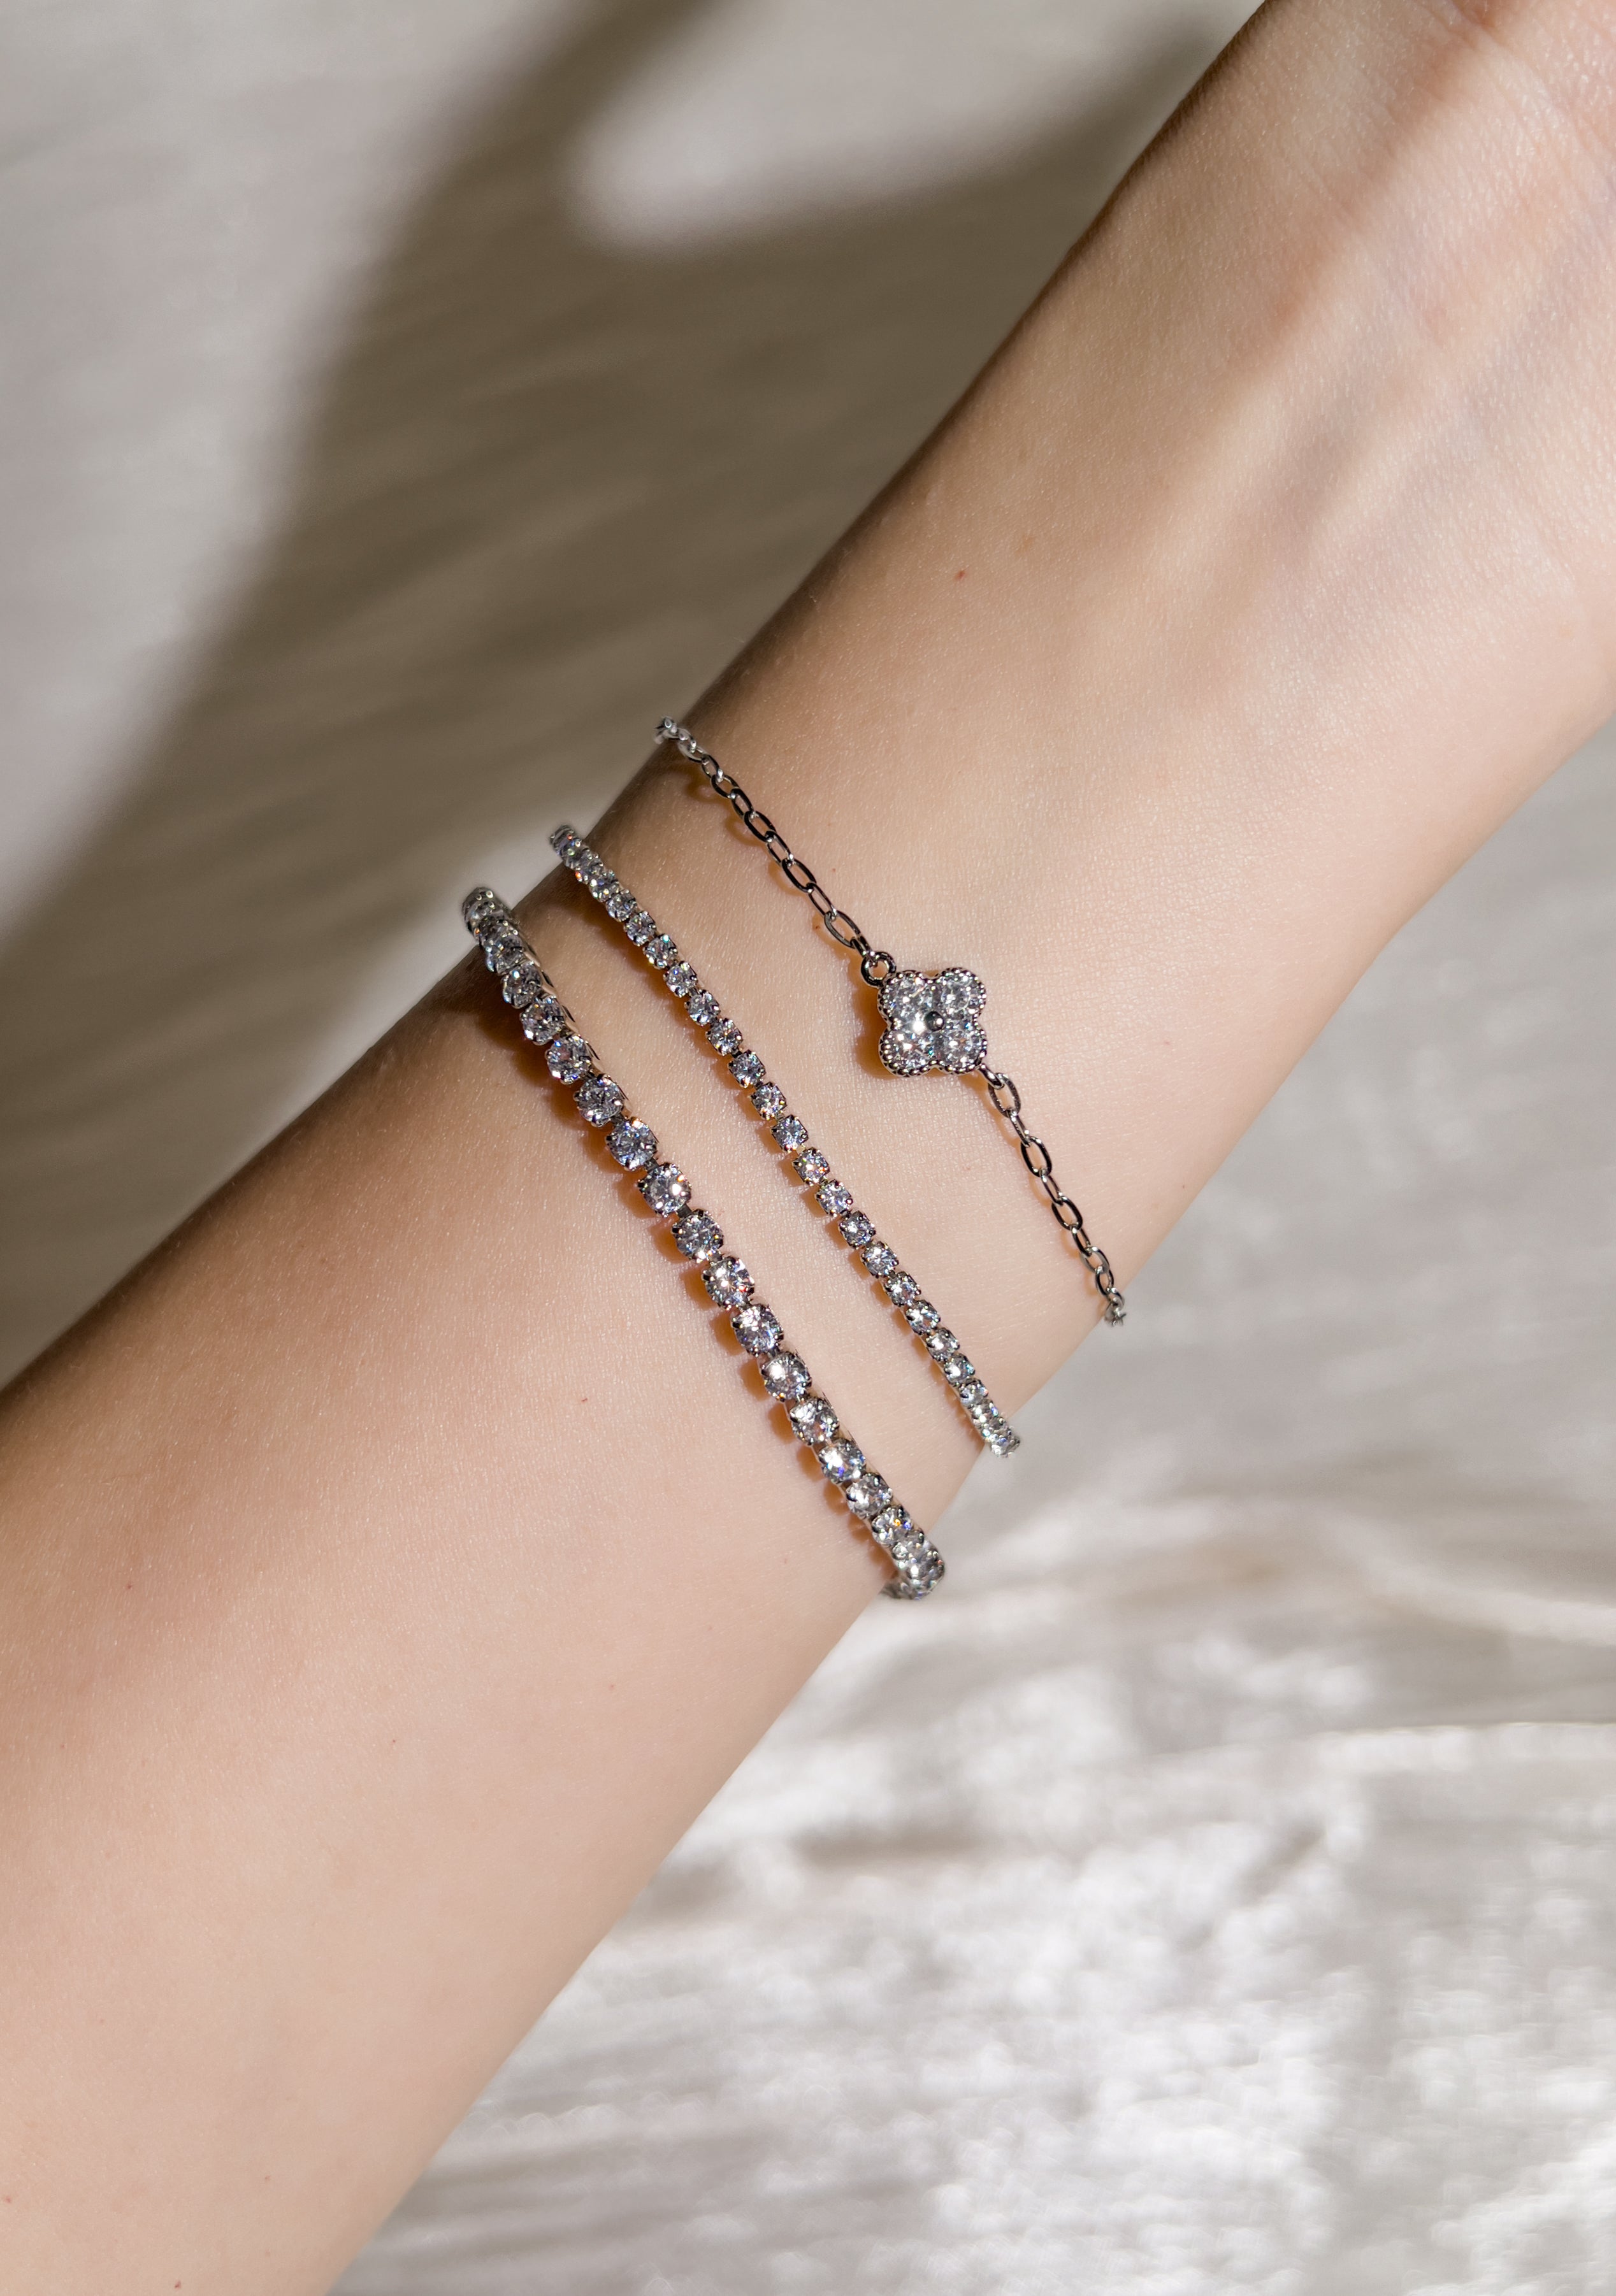 Delicate and Dainty Bracelets